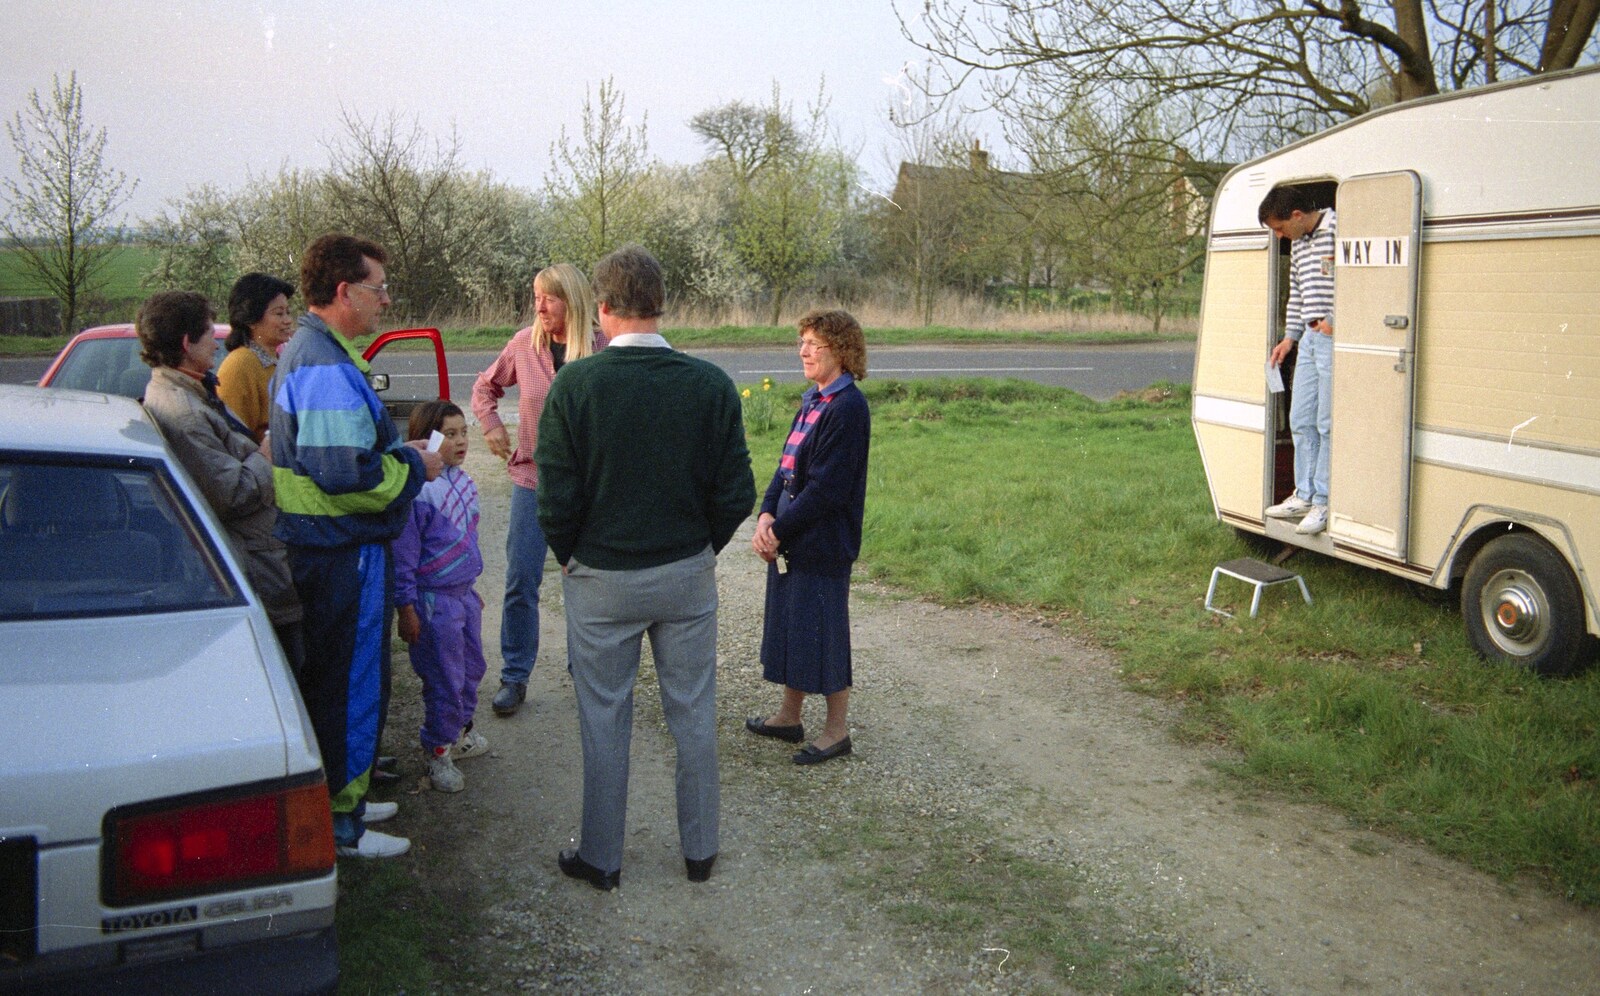 Discussions near the Polling Caravan from The Election Caravan and a View from a Cherry Picker, Stuston, Suffolk - 9th April 1992